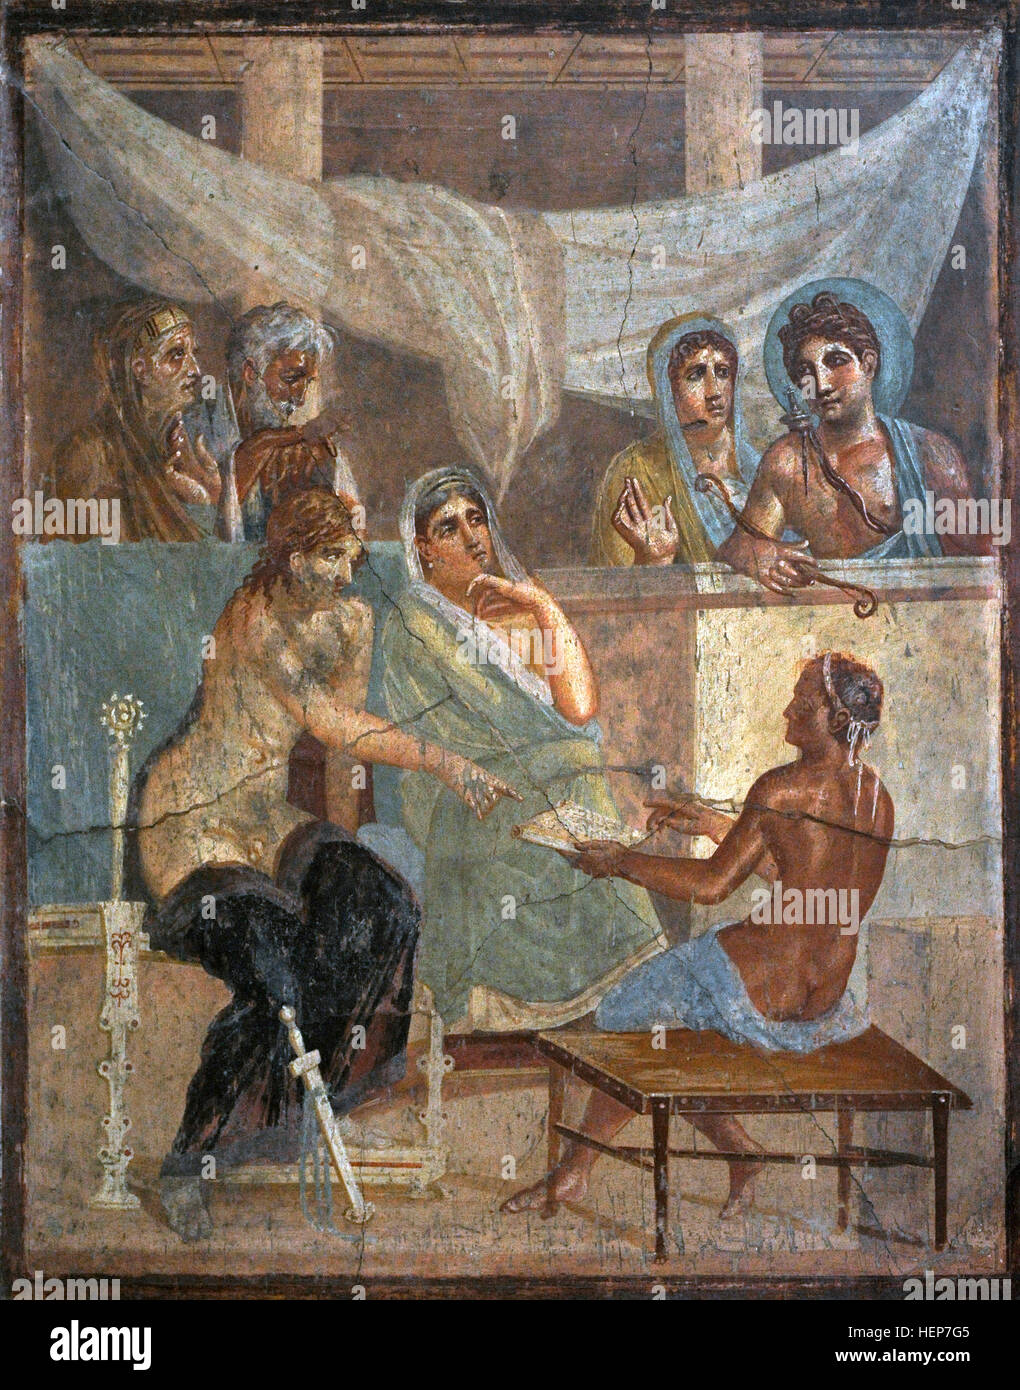 Admetus and Alcestis consulting the oracle (Apollo). House of Tragic Poet.1st century AD. Pompeii. National Archaeological Museum, Naples. Italy. Stock Photo